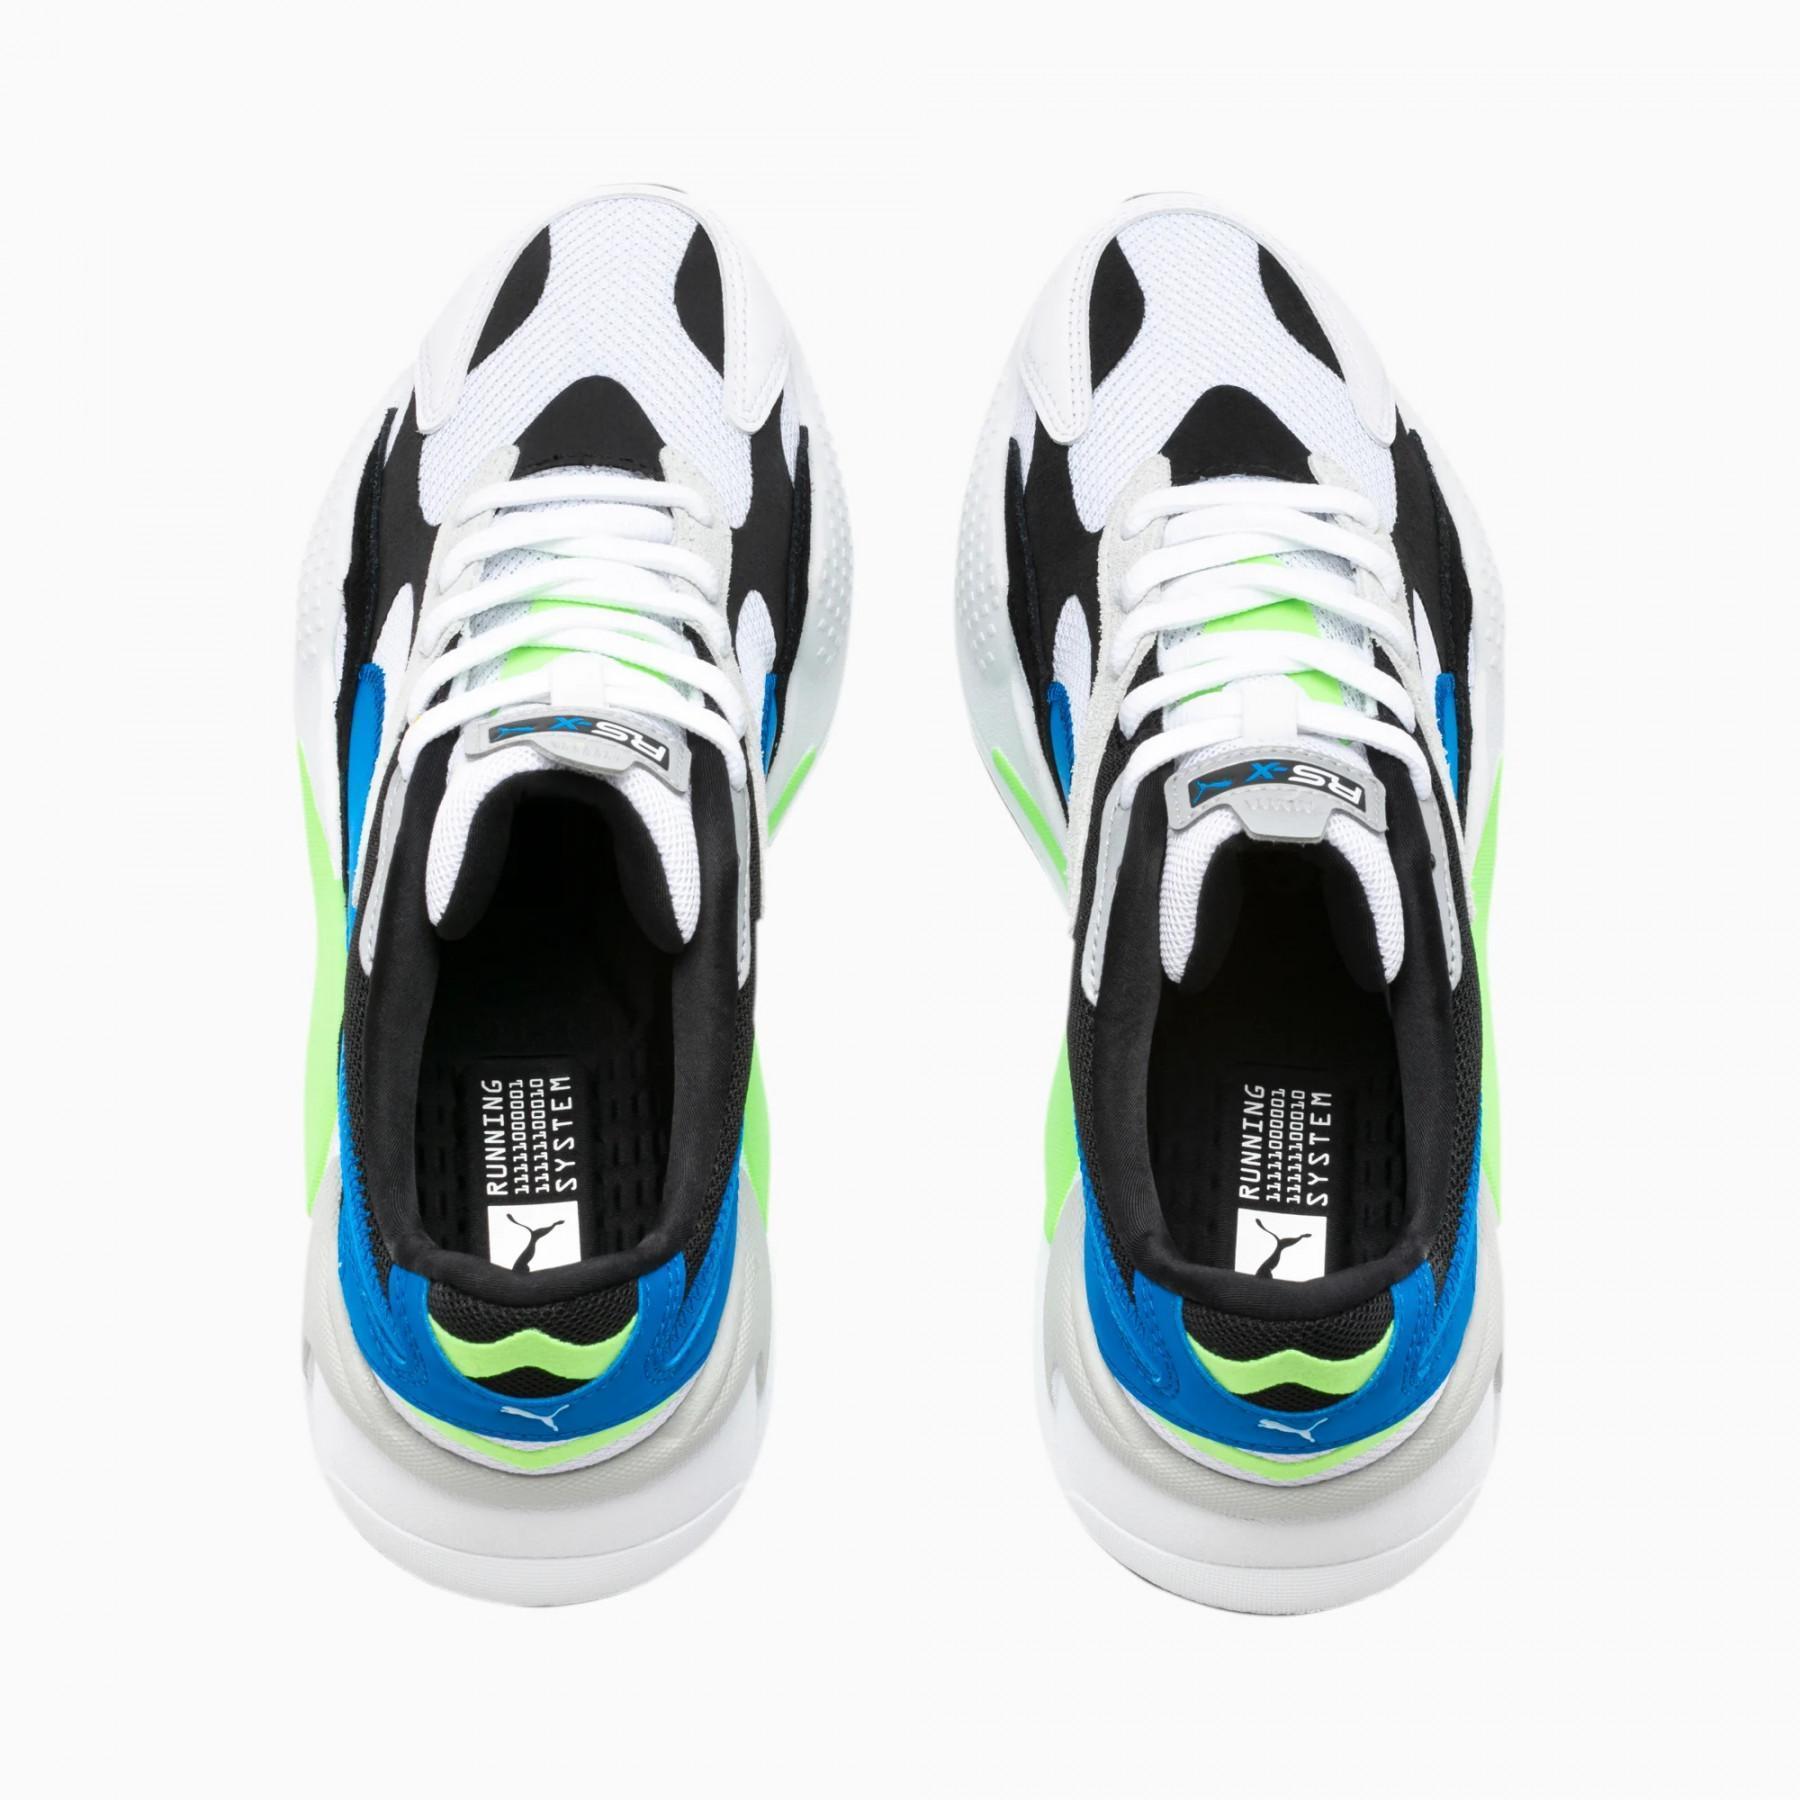 Sneakers Puma RS-X³ Puzzle Soft